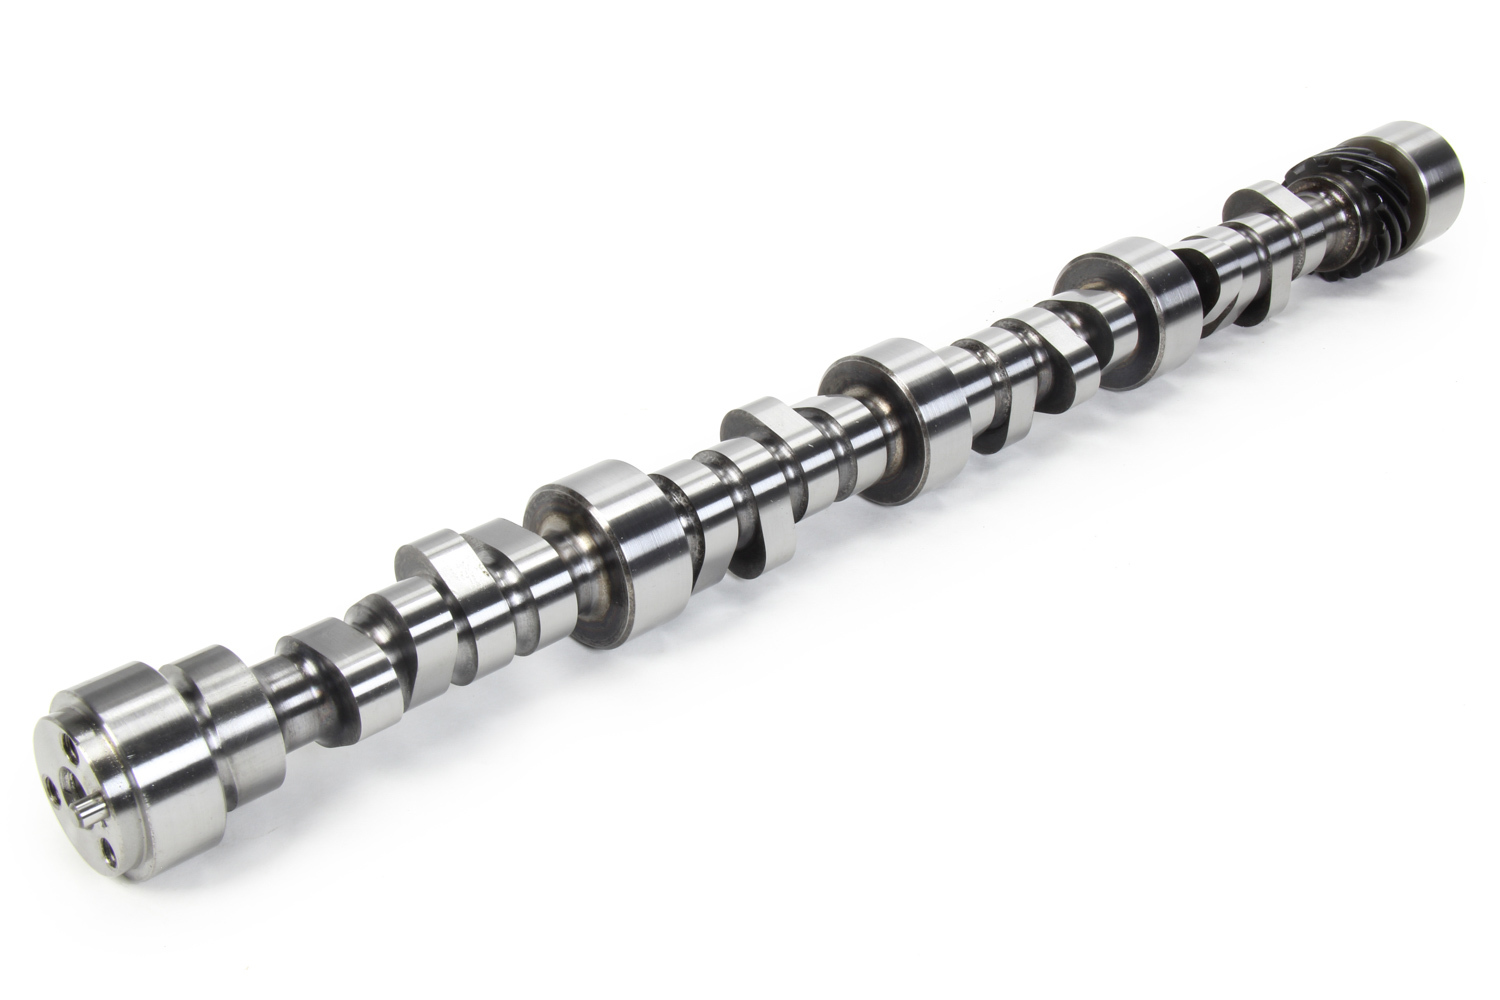 Comp Cams 08-697-11 Camshaft, Hydraulic Roller, Lift 0.498 / 0.531 in, Duration 276 / 284, 112 LSA, 4000 / 7000 RPM, Small Block Chevy, Each